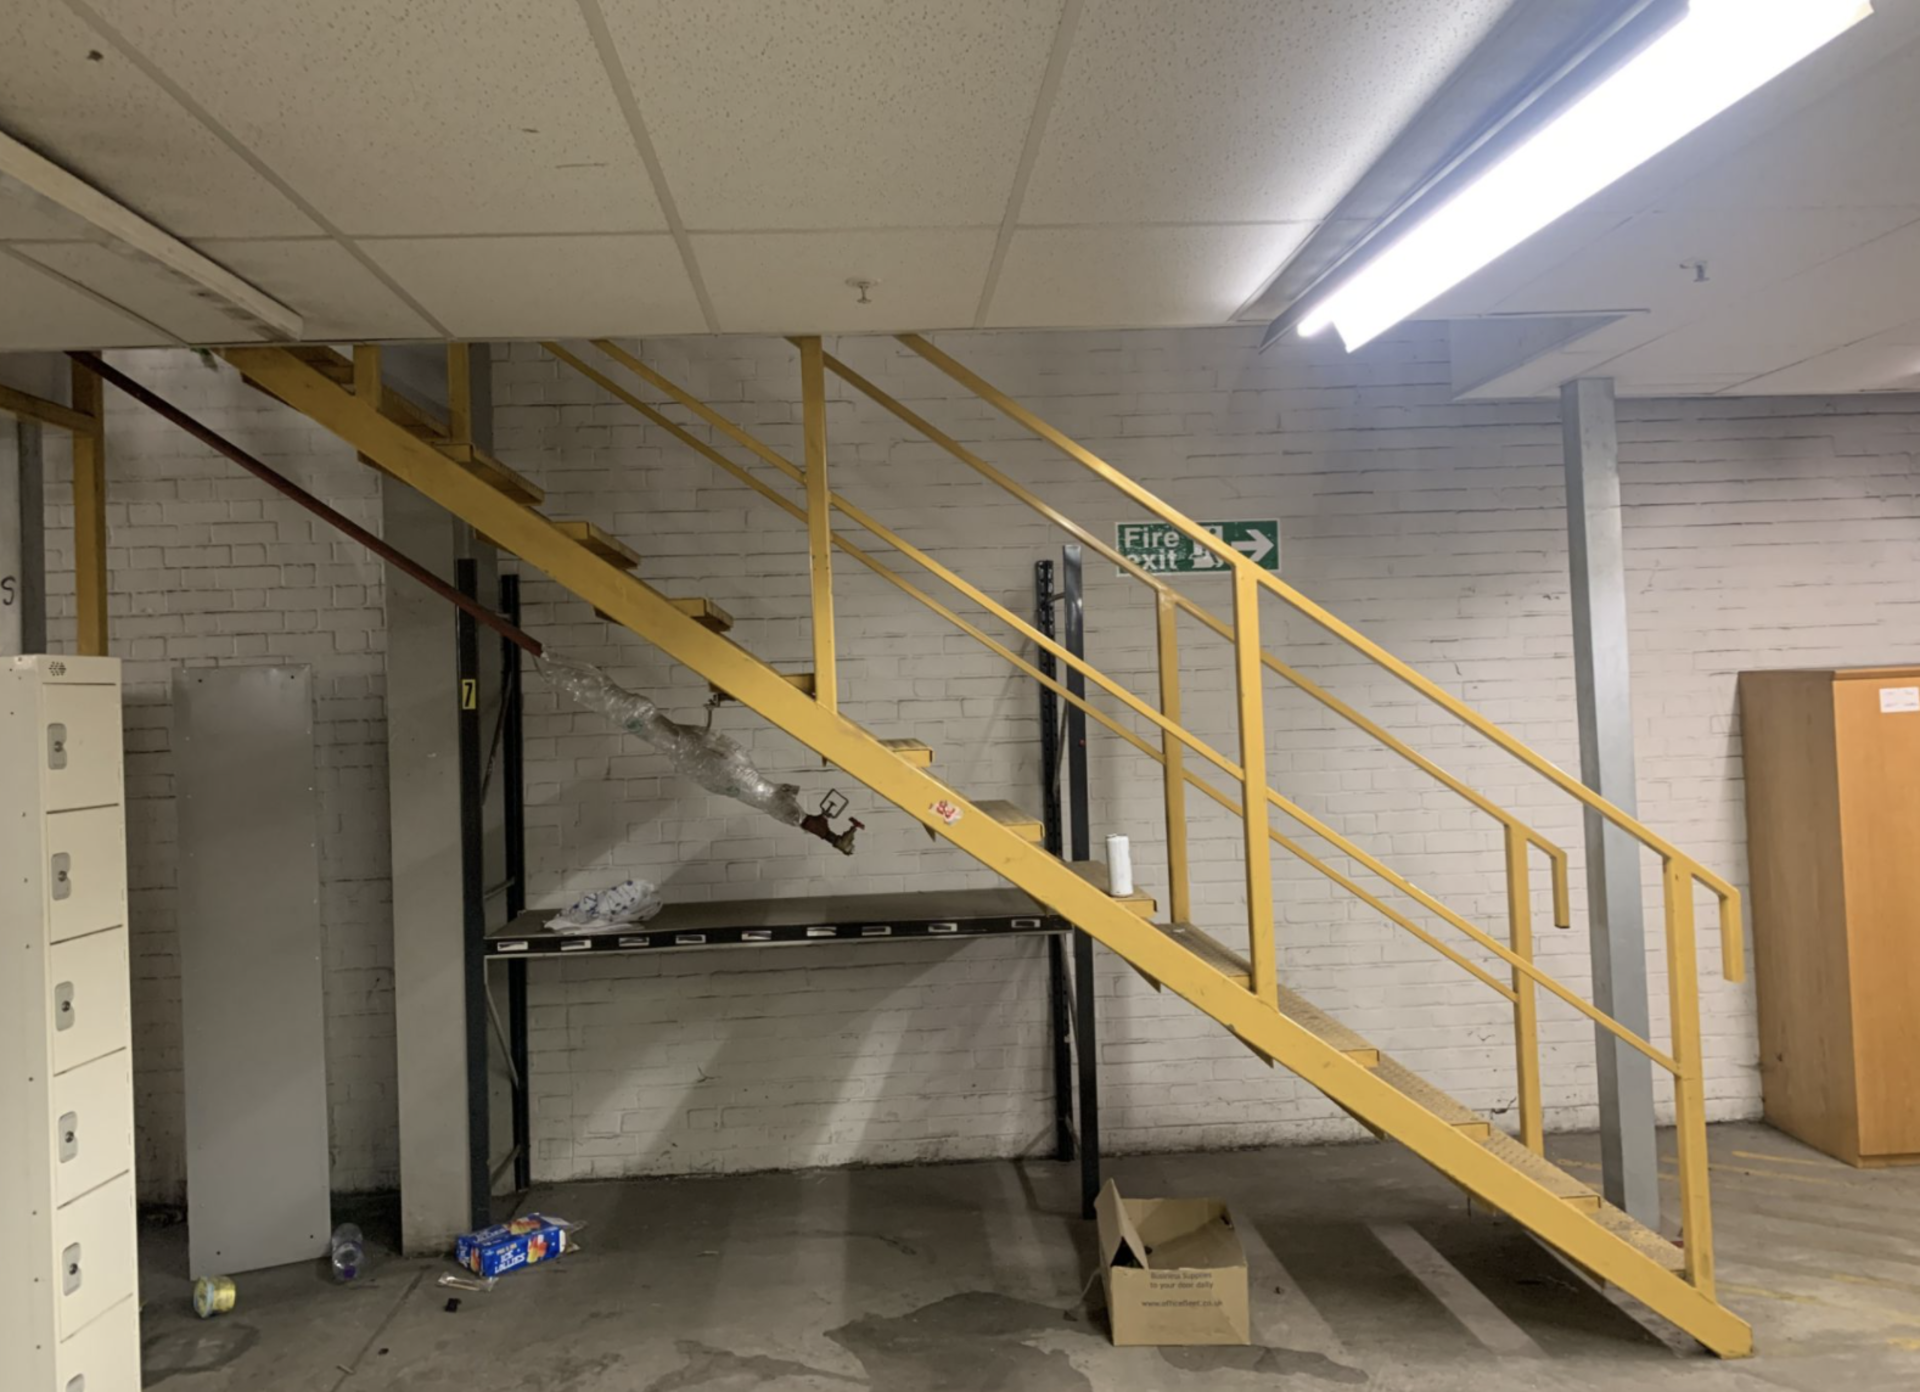 £500,000 MEZZANINE FLOOR 80m x 28m 3 stairs and loading bay inc - Image 6 of 21